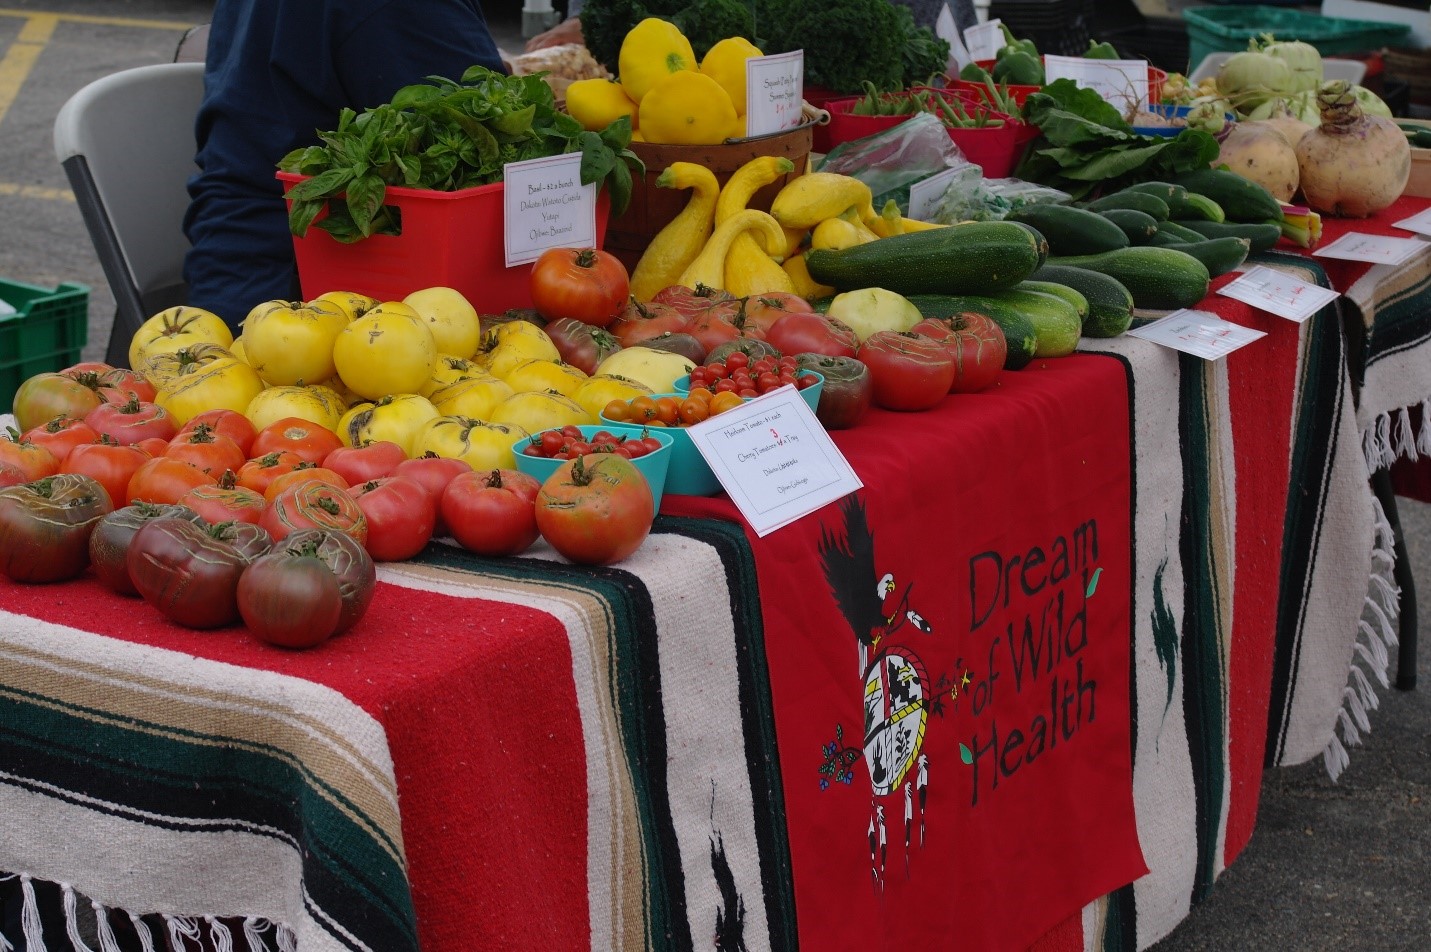 DWH farmers market booth featuring an assortment of mid-summer veggies.